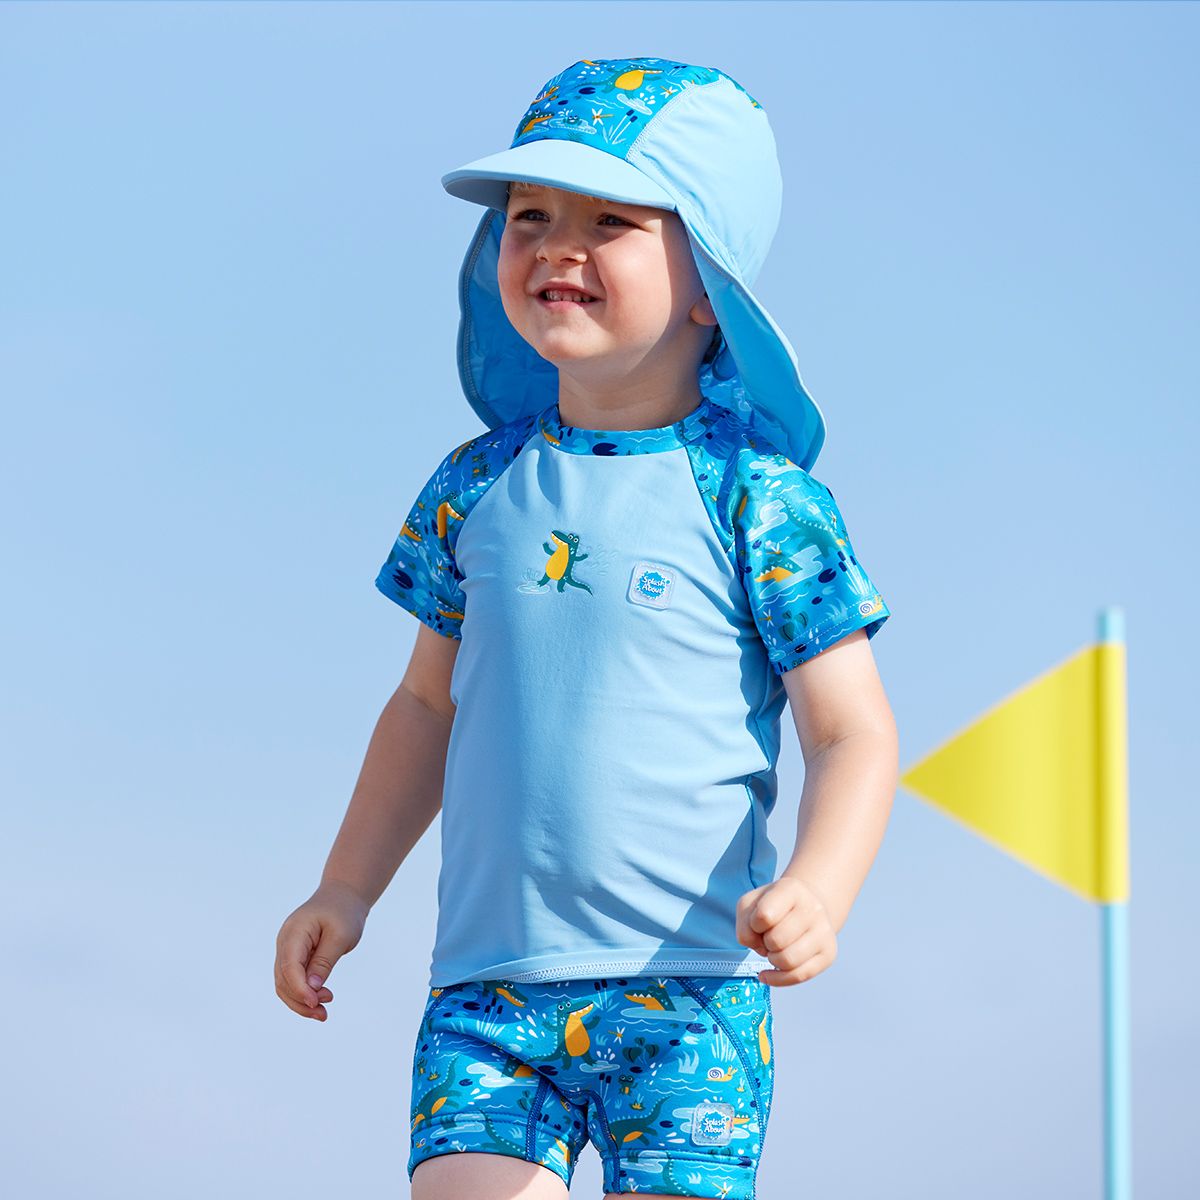 Lifestyle image of toddler wearing a legionnaire style sun hat in the beach. The hat is light blue and blue, with swamp themed print panel including crocodiles, frogs, fireflies and more. He's also wearing matching rash top and jammers.